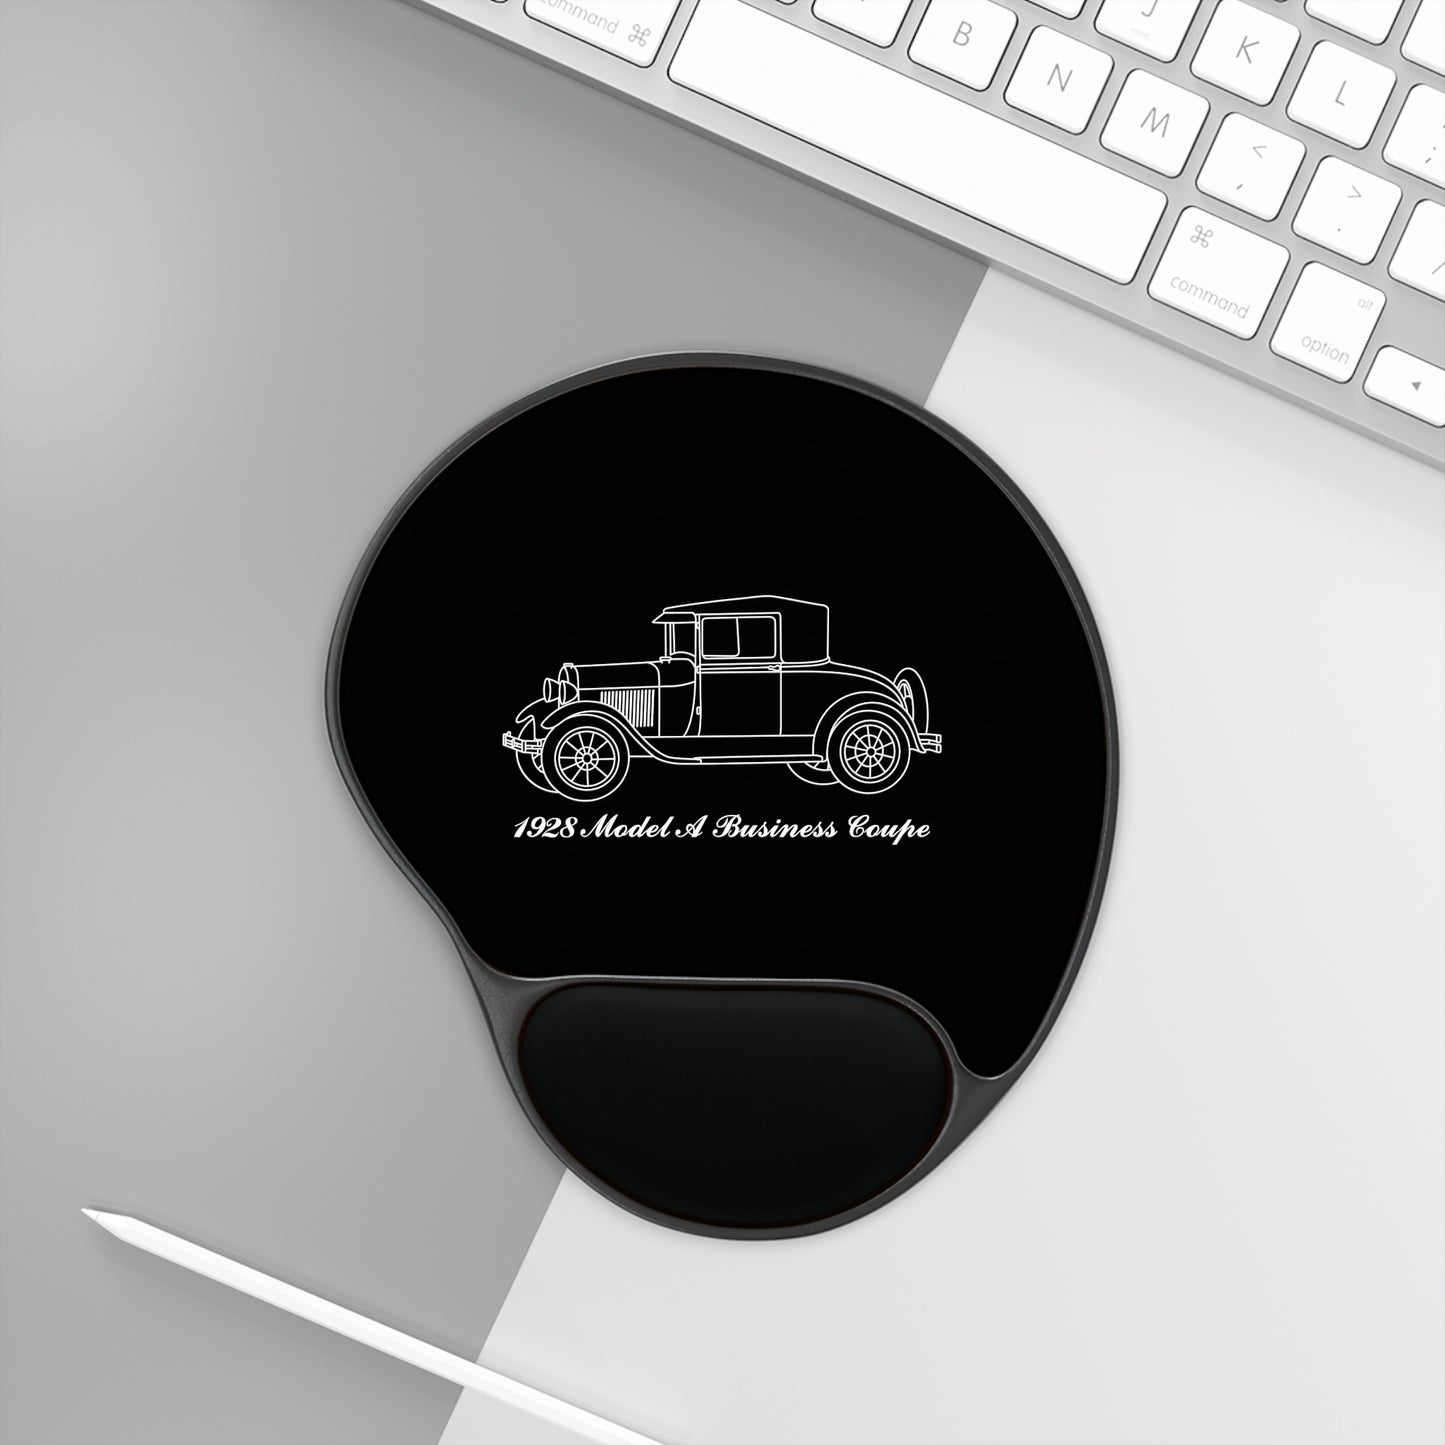 1928 Business Coupe Wrist Rest Mouse Pad